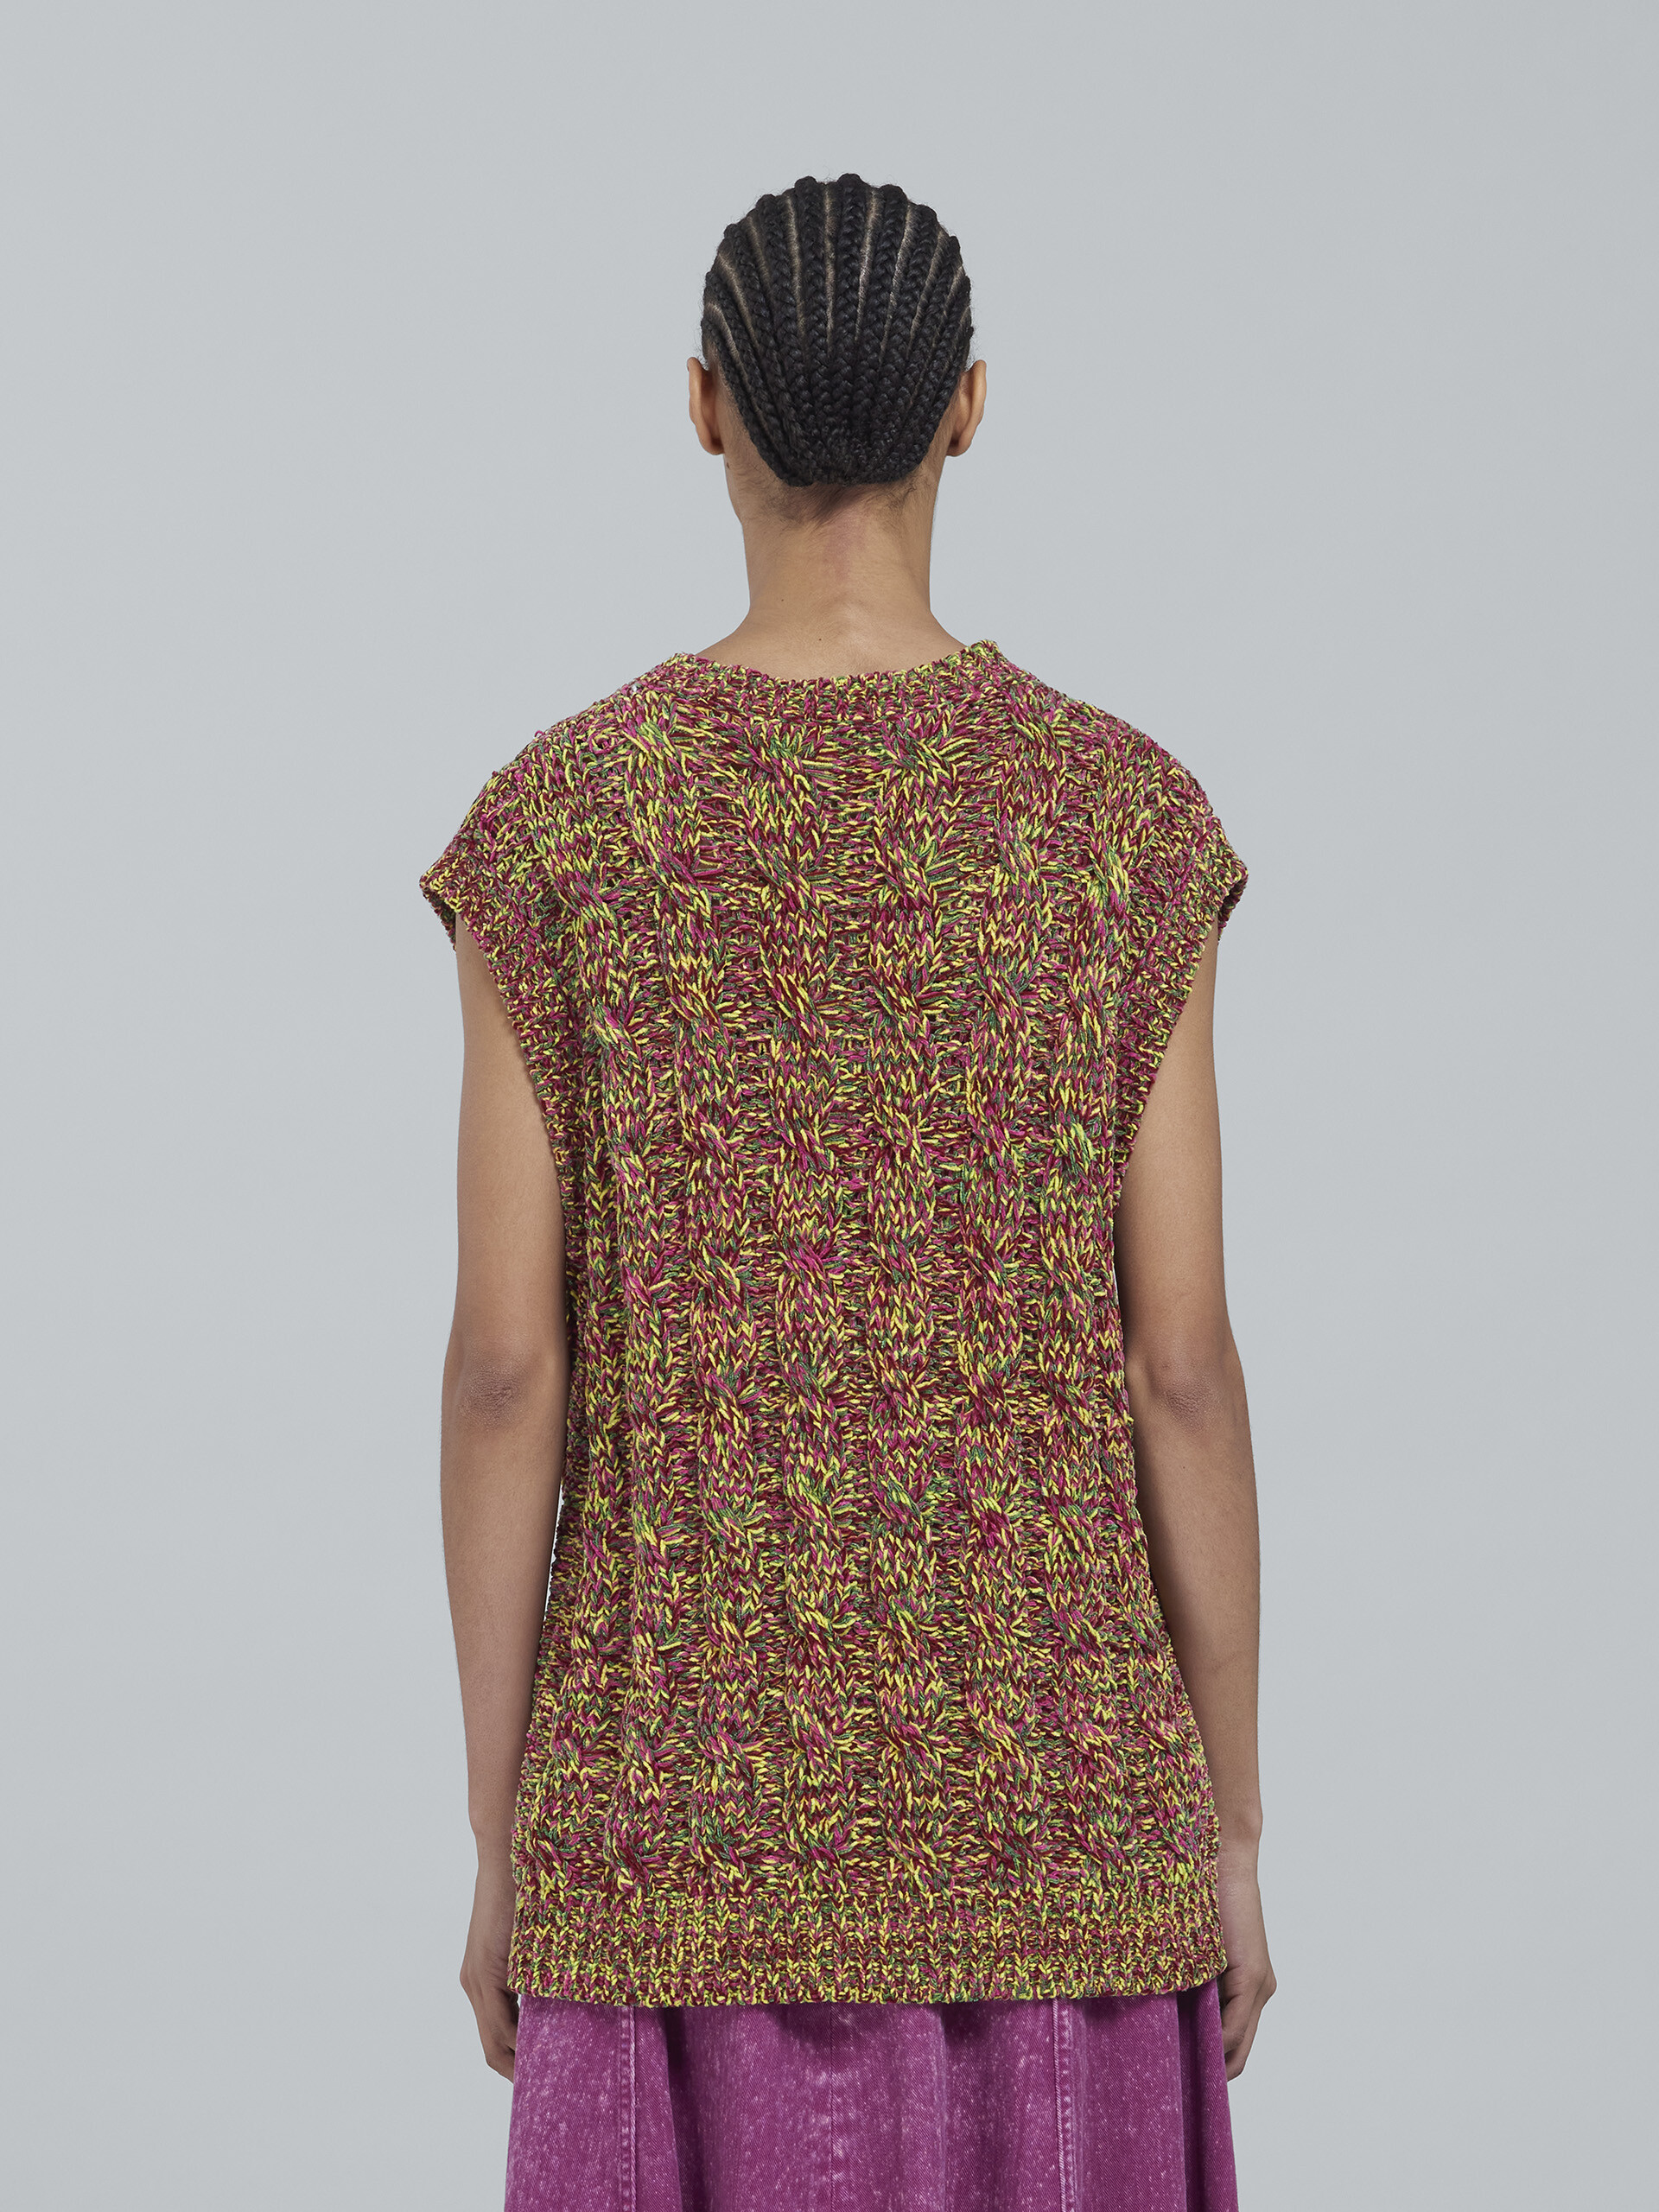 Viscose and cotton chenille vest - Pullovers - Image 3